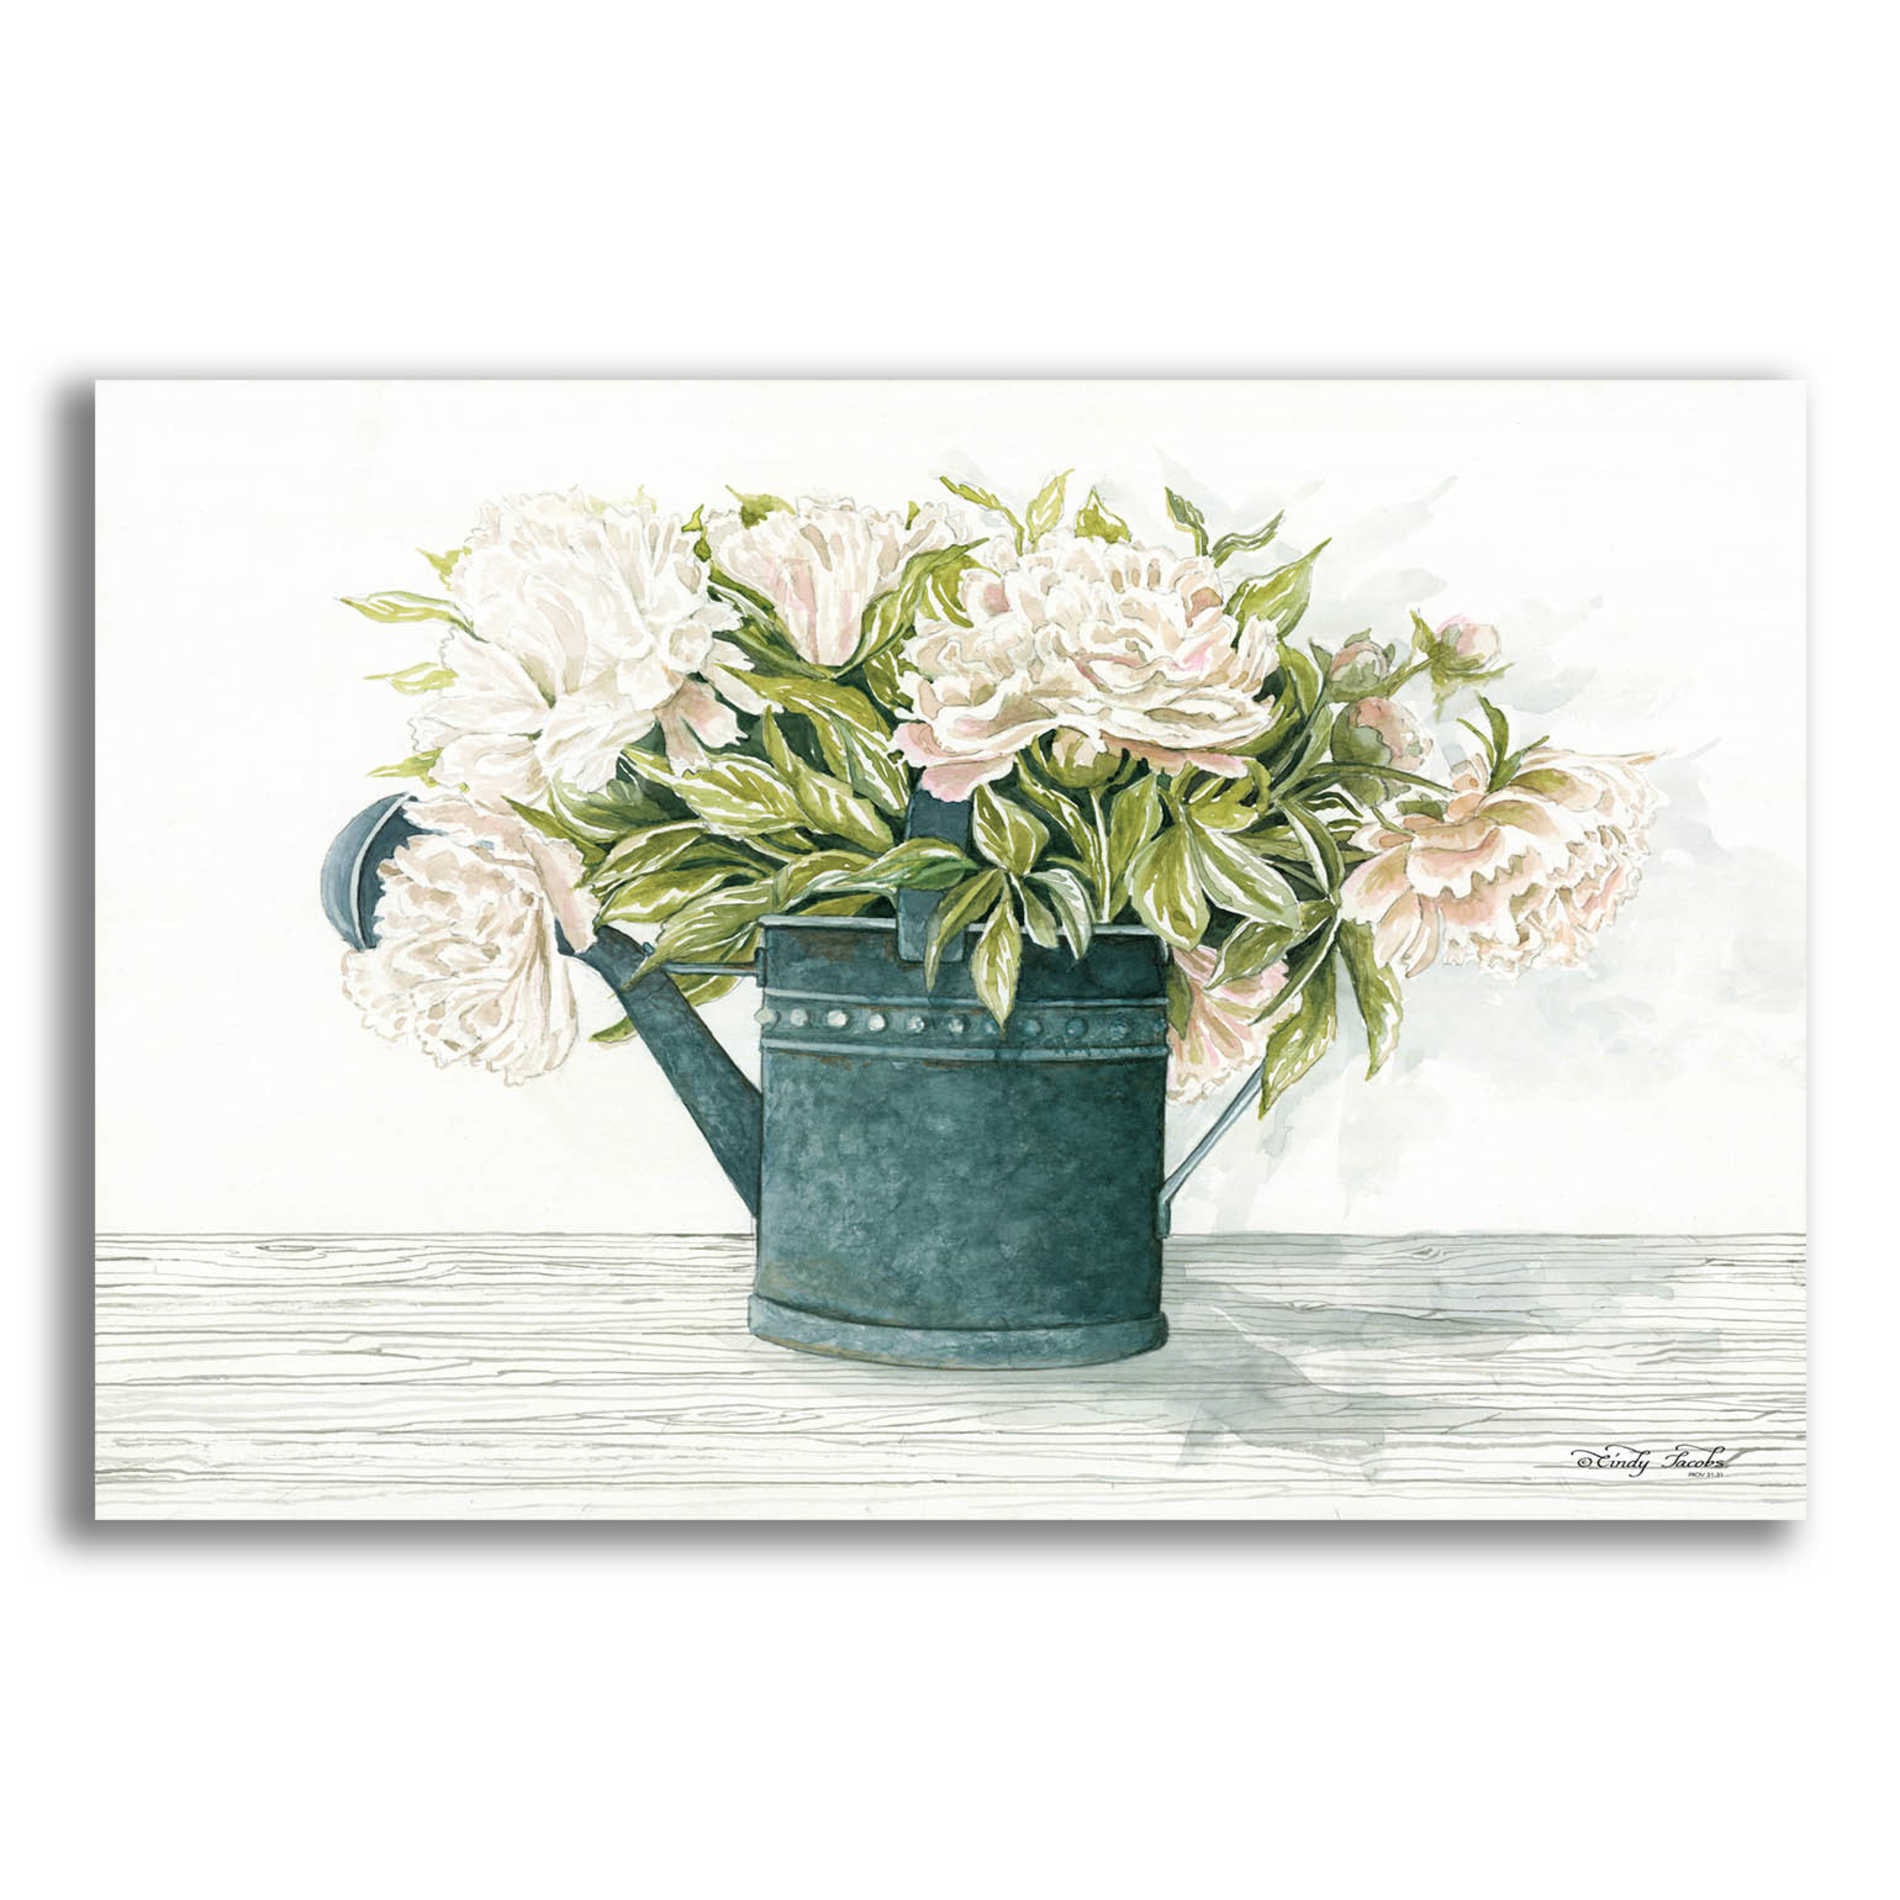 Epic Art 'Galvanized Watering Can Peonies' by Cindy Jacobs, Acrylic Glass Wall Art,24x16